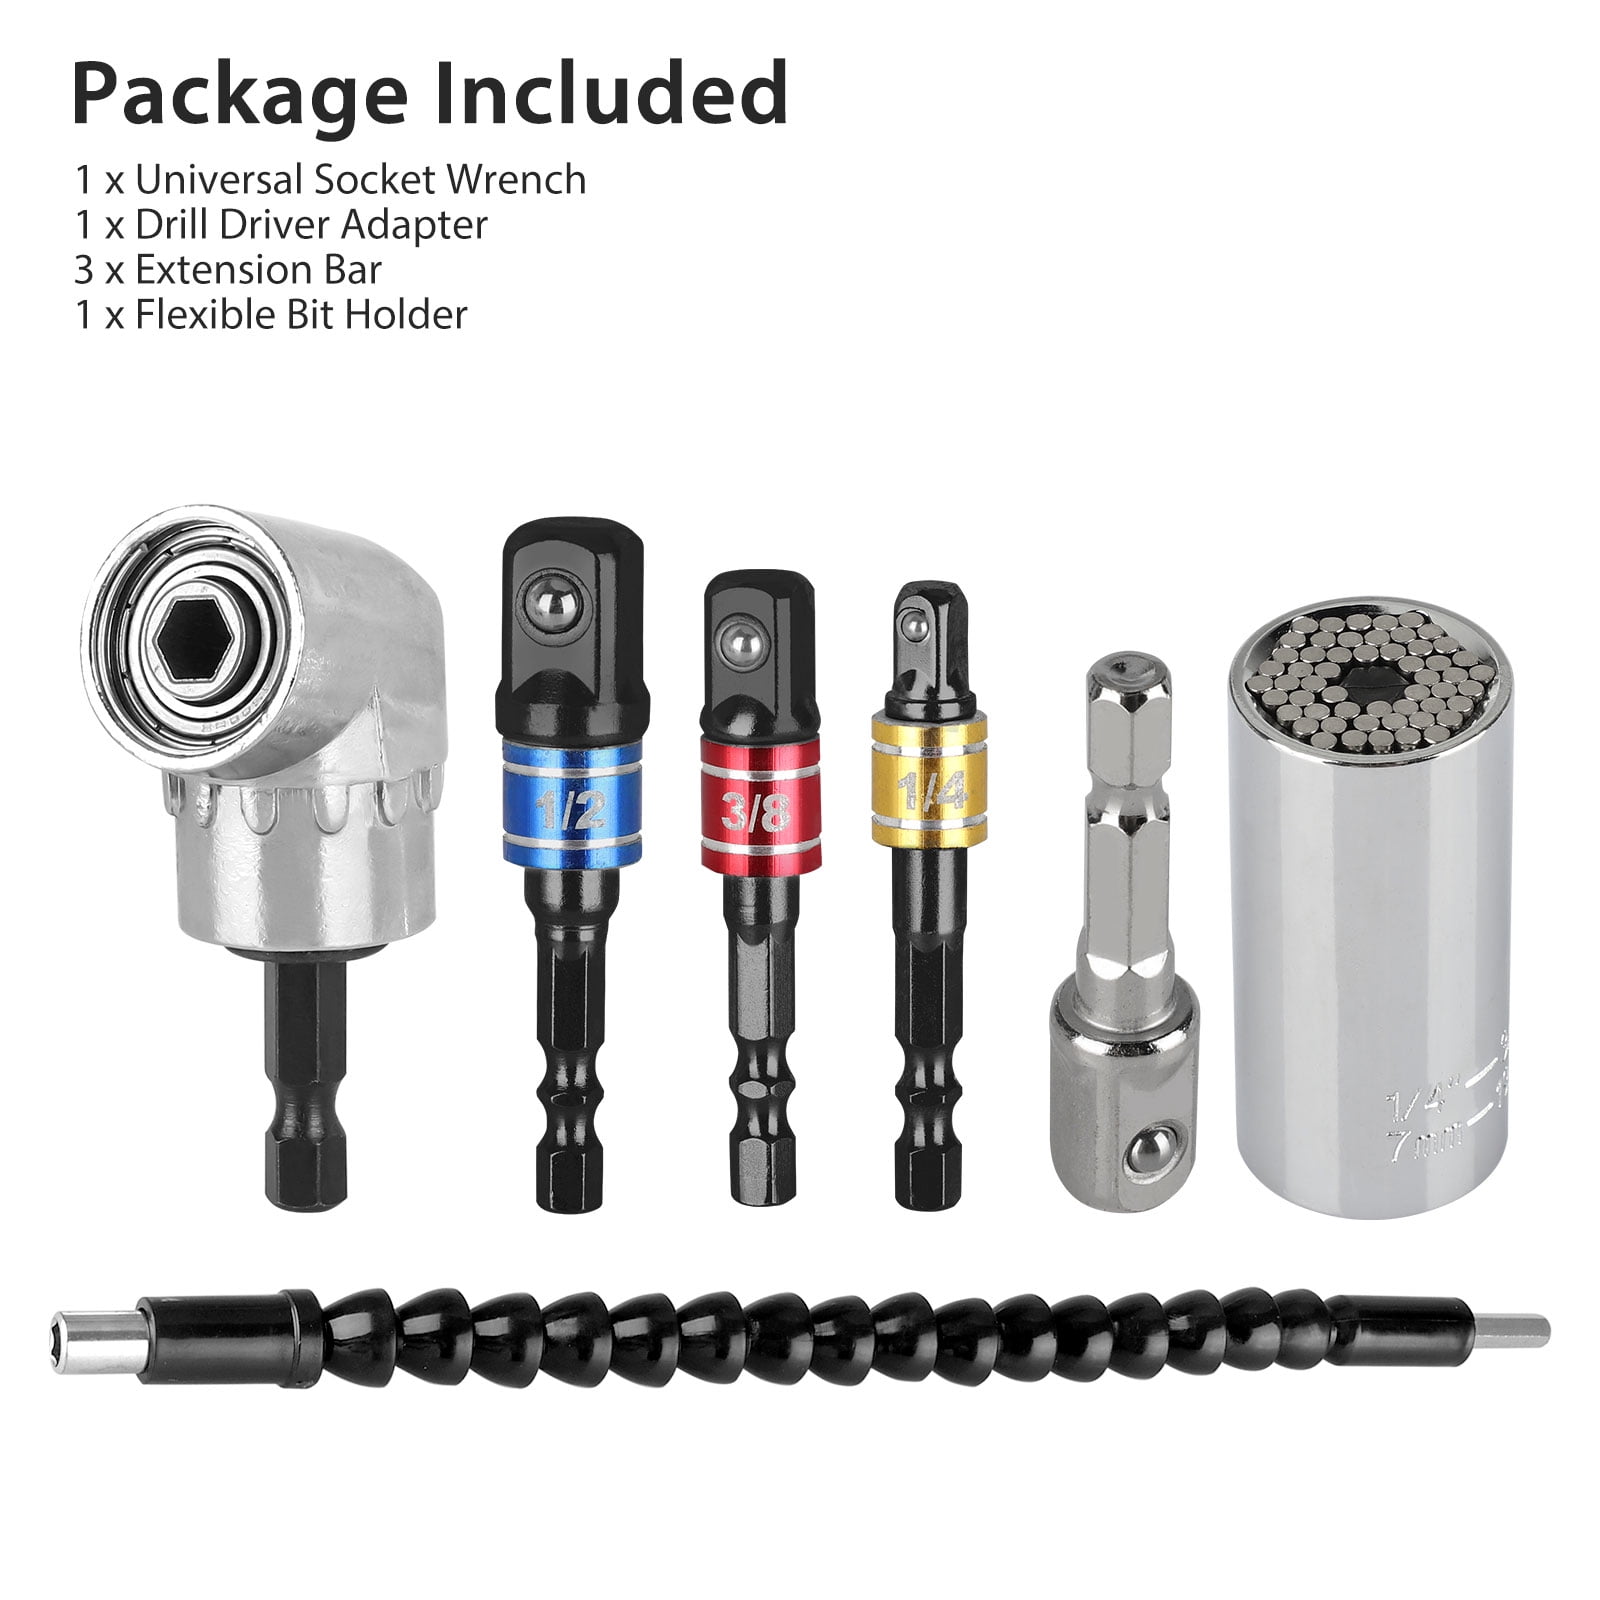 3Pcs 1/4 3/8 1/2 Universal Socket Adapter Set,105 Degree Right Angle Drill 6.35mm Hex Drill Bit for Extension Impact Grade Power Driver Drill Adapter Set 7-19mm Ratchet Wrench 